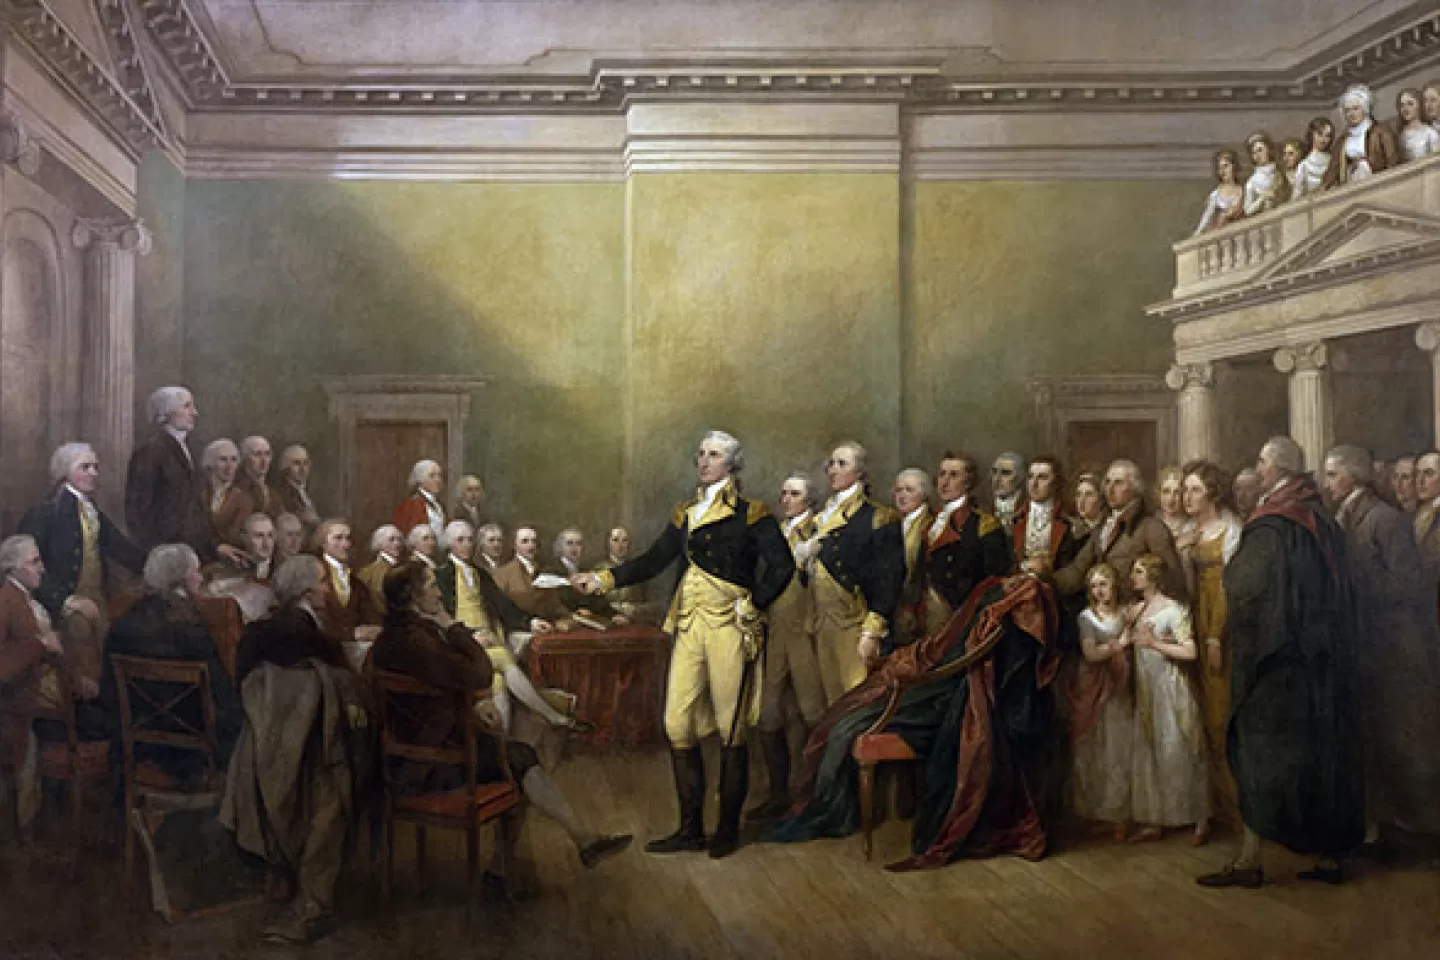 The "General George Washington Resigning His Commission" painting by John Trumbull on display in the U.S. Capitol Rotunda.